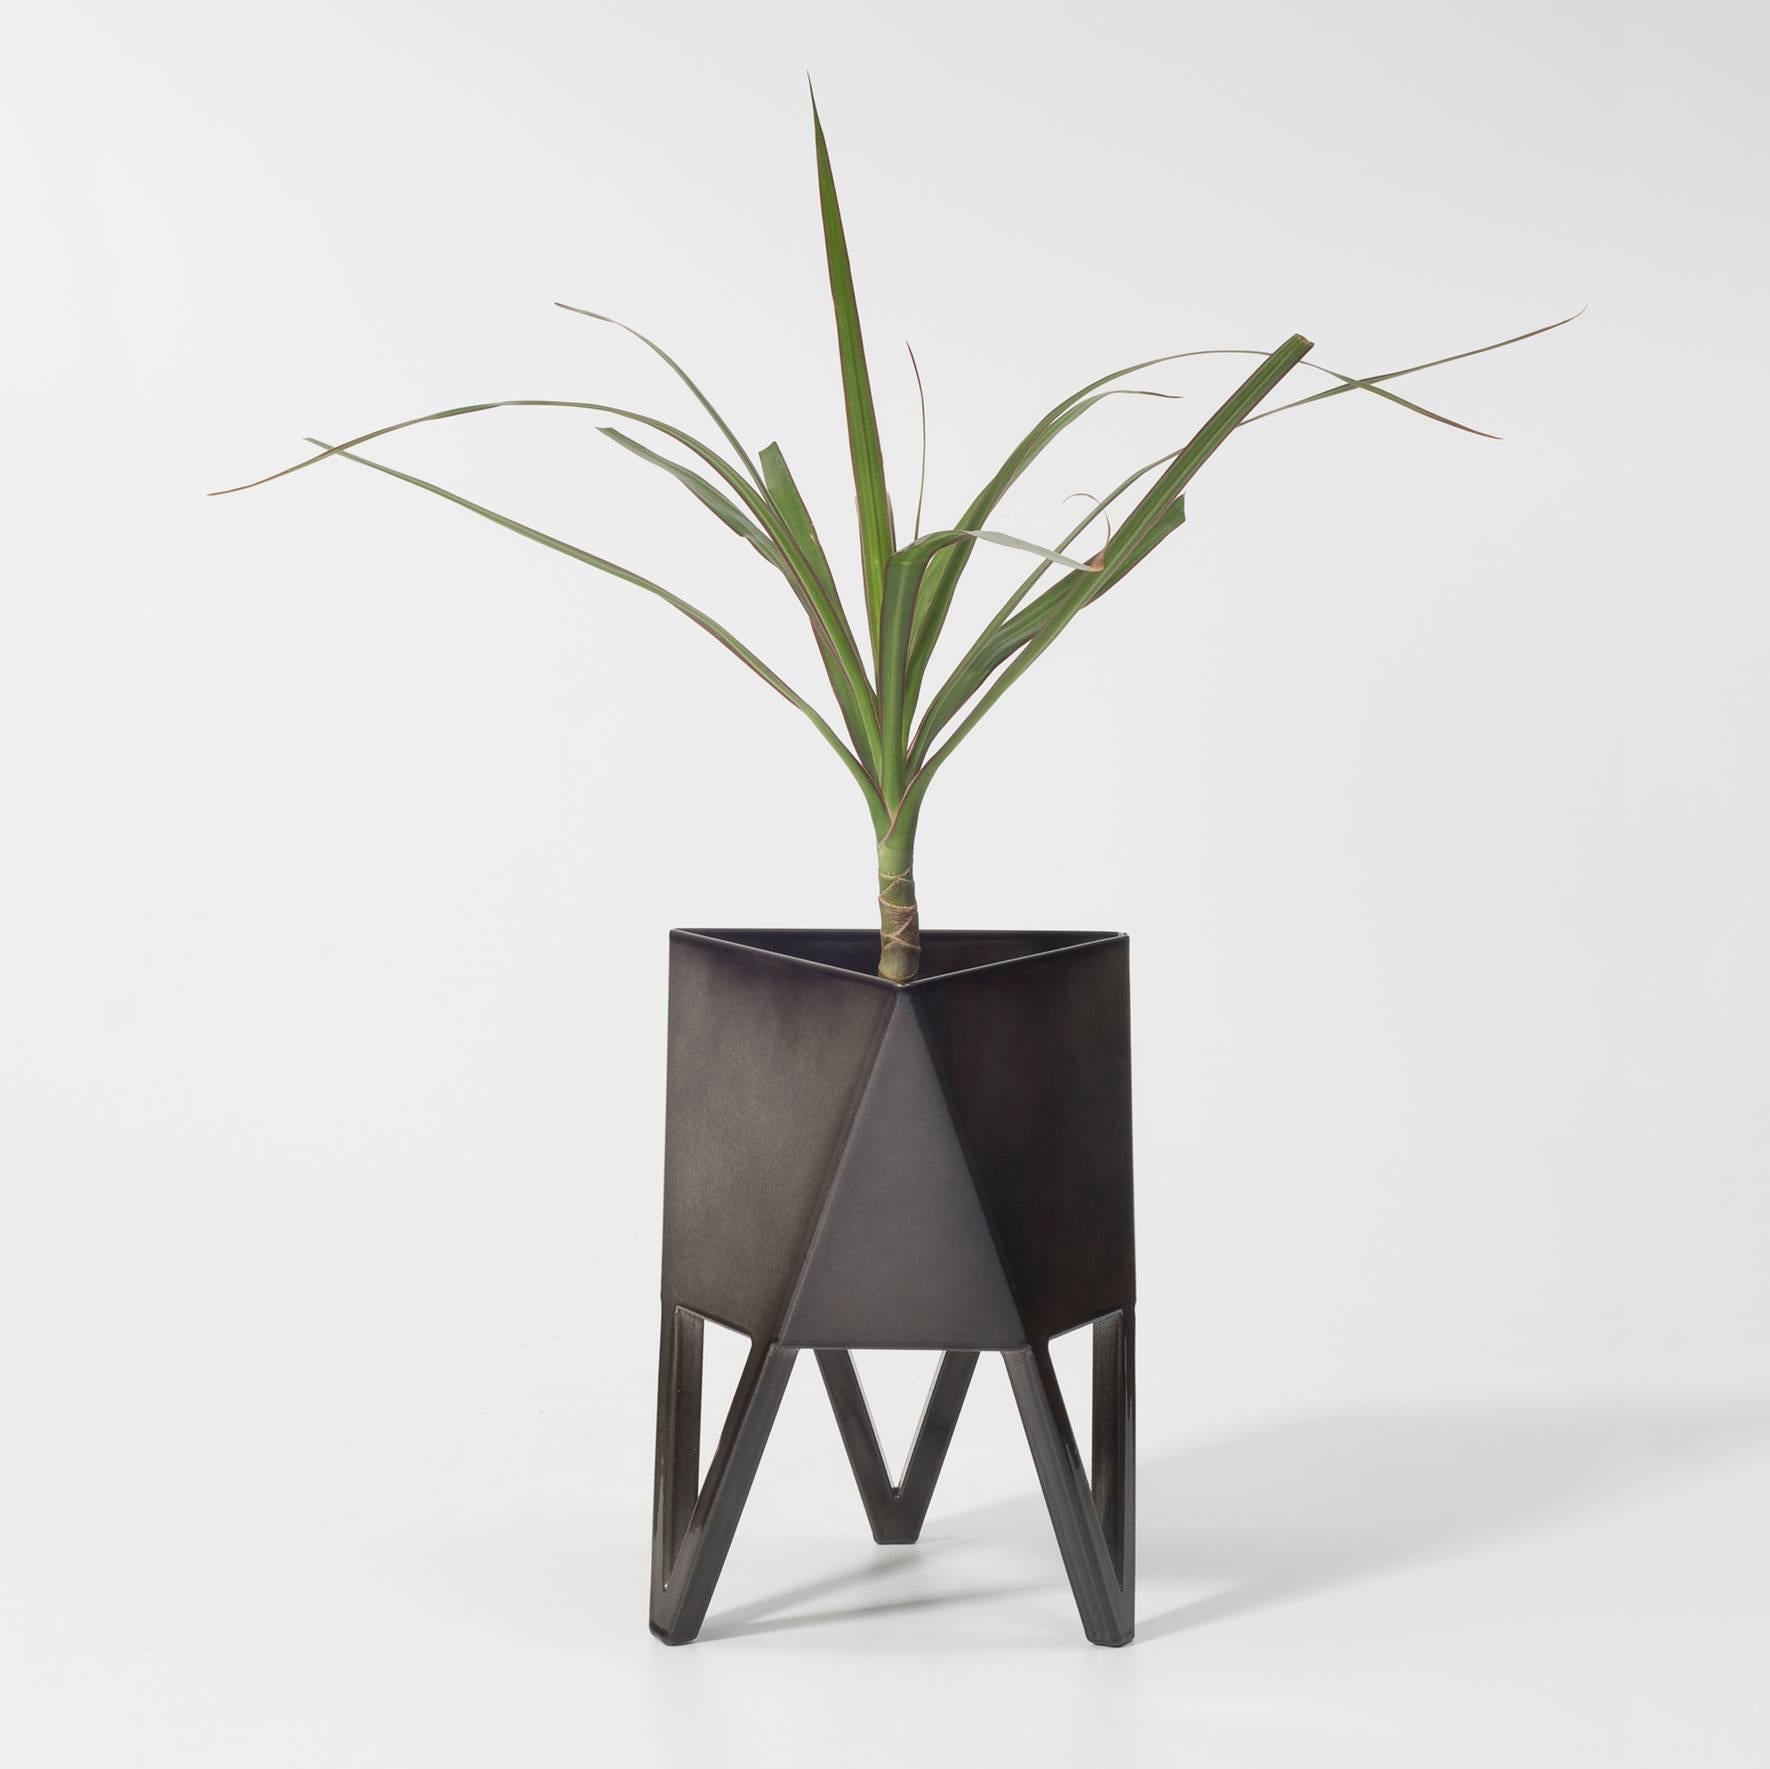 Contemporary Deca Planter in Bluegreen Steel, Mini, by Force/Collide